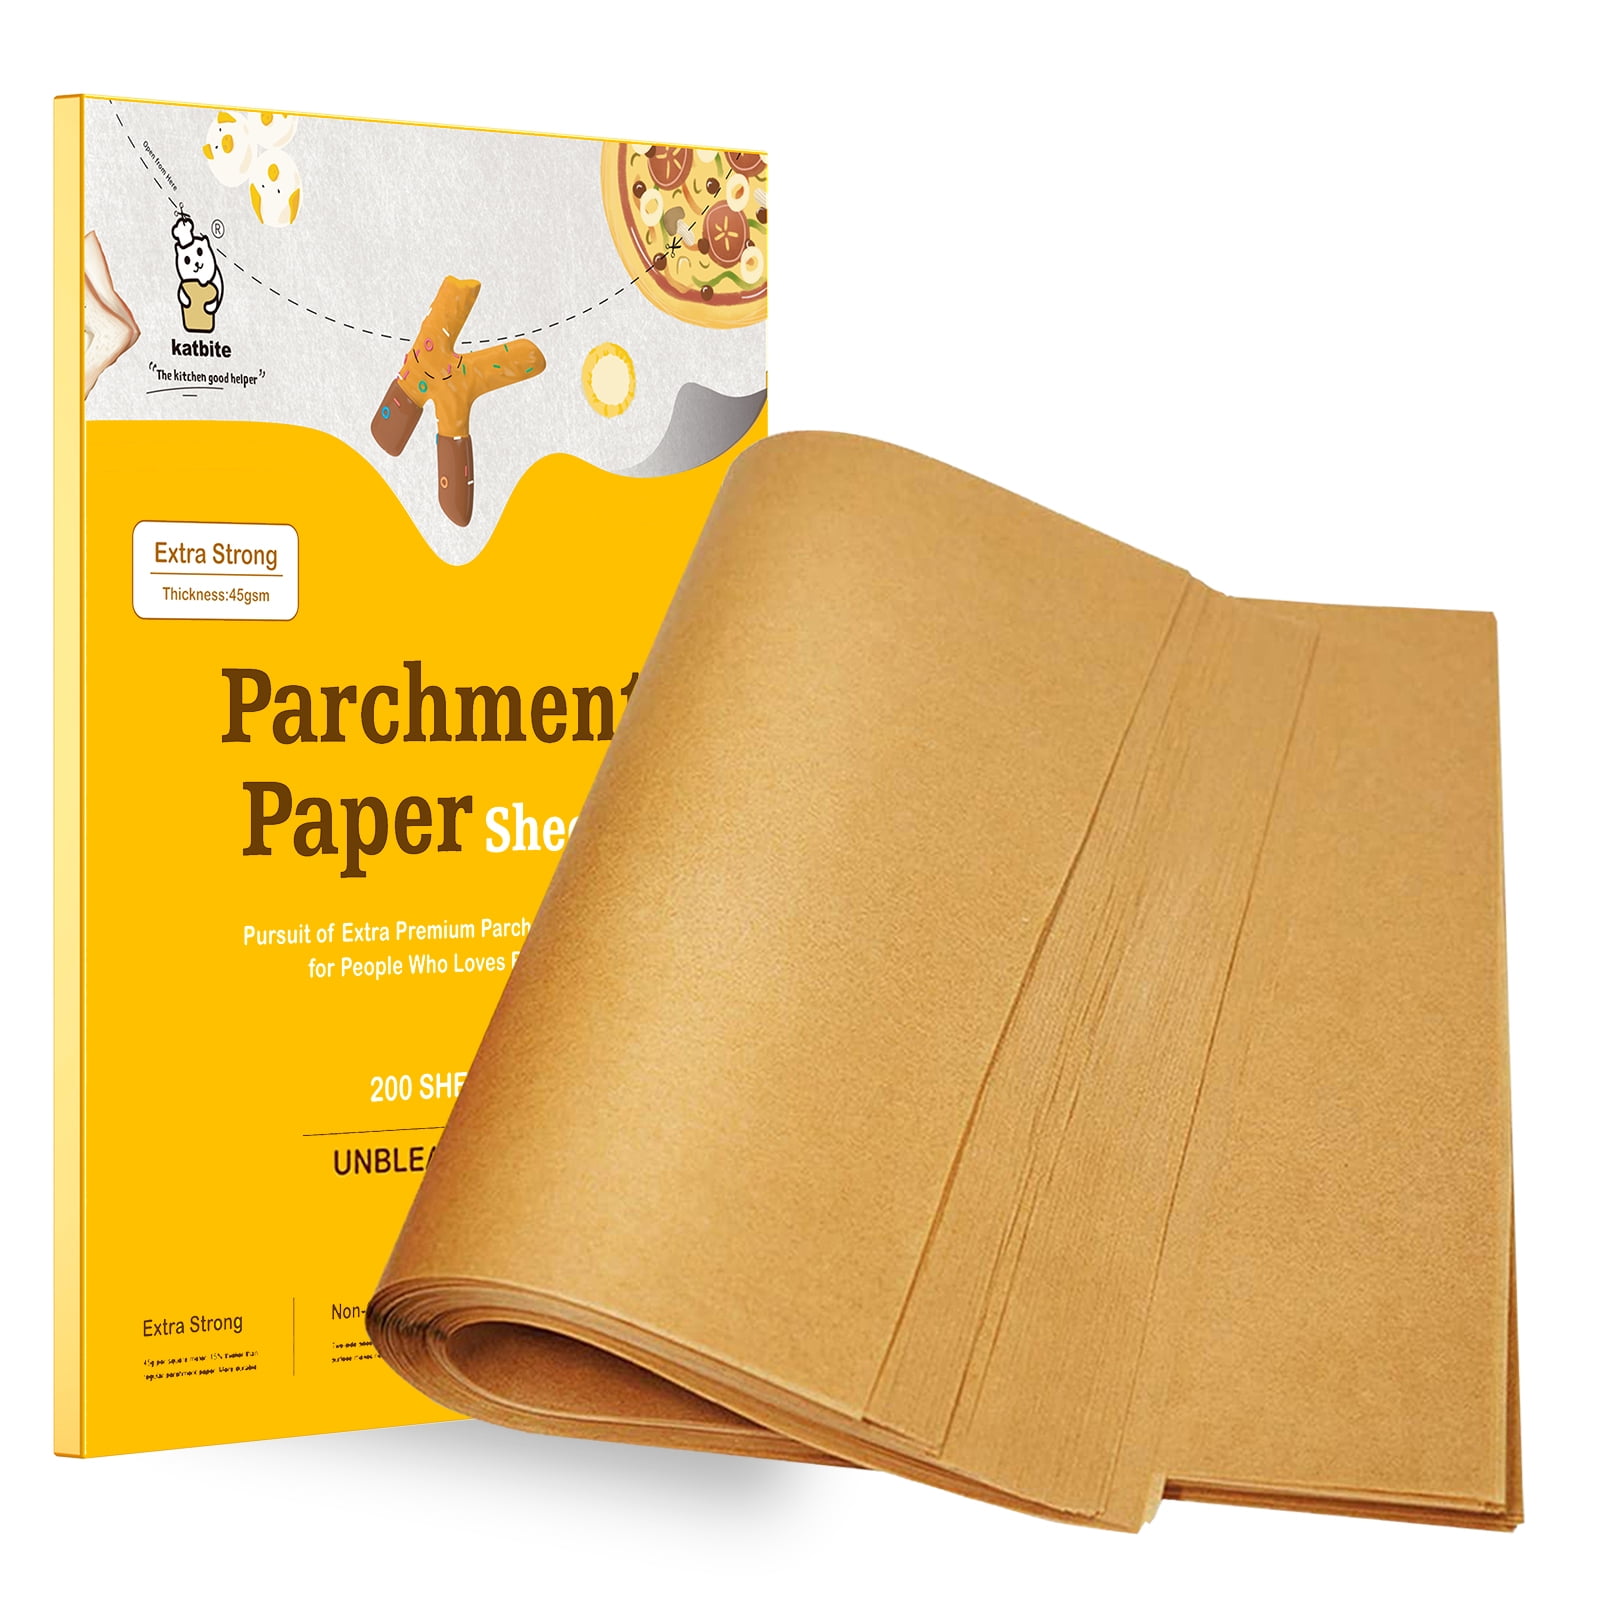 Katbite Parchment Paper in Kitchen Cleaning Supplies 